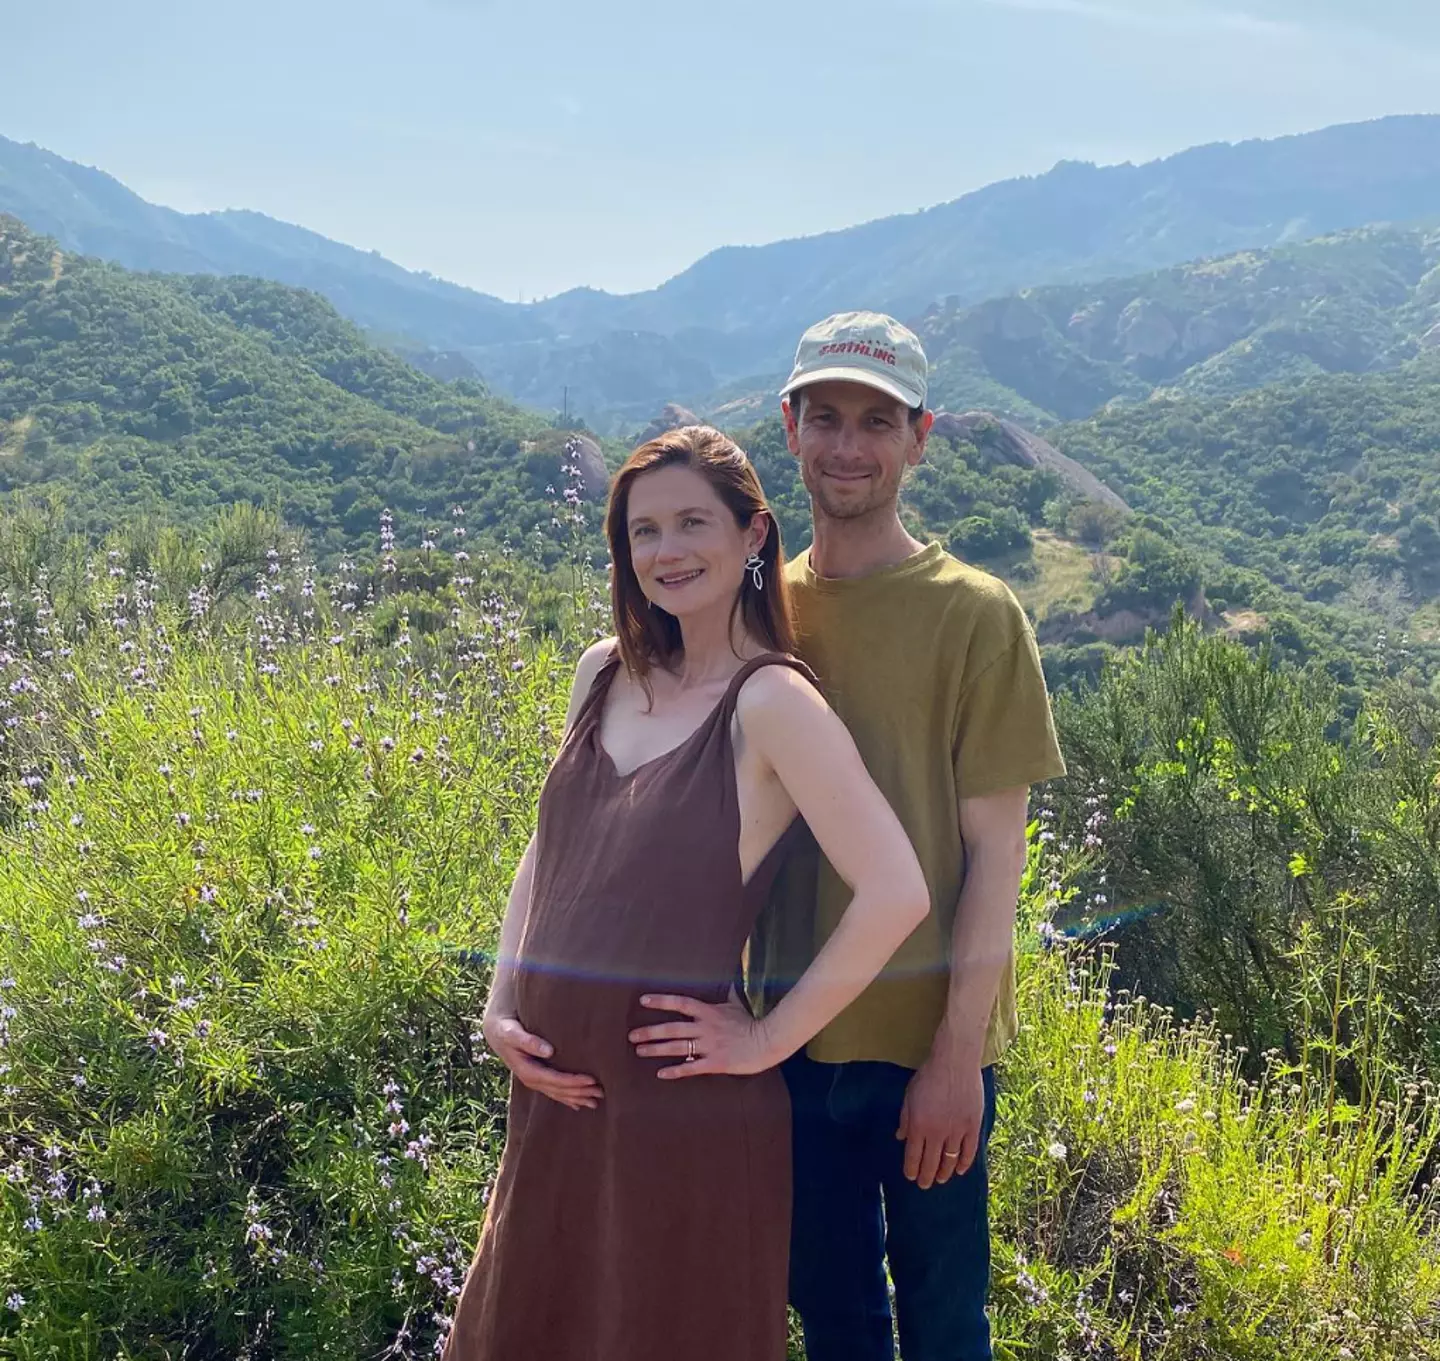 Bonnie Wright has announced she's expecting her first child.